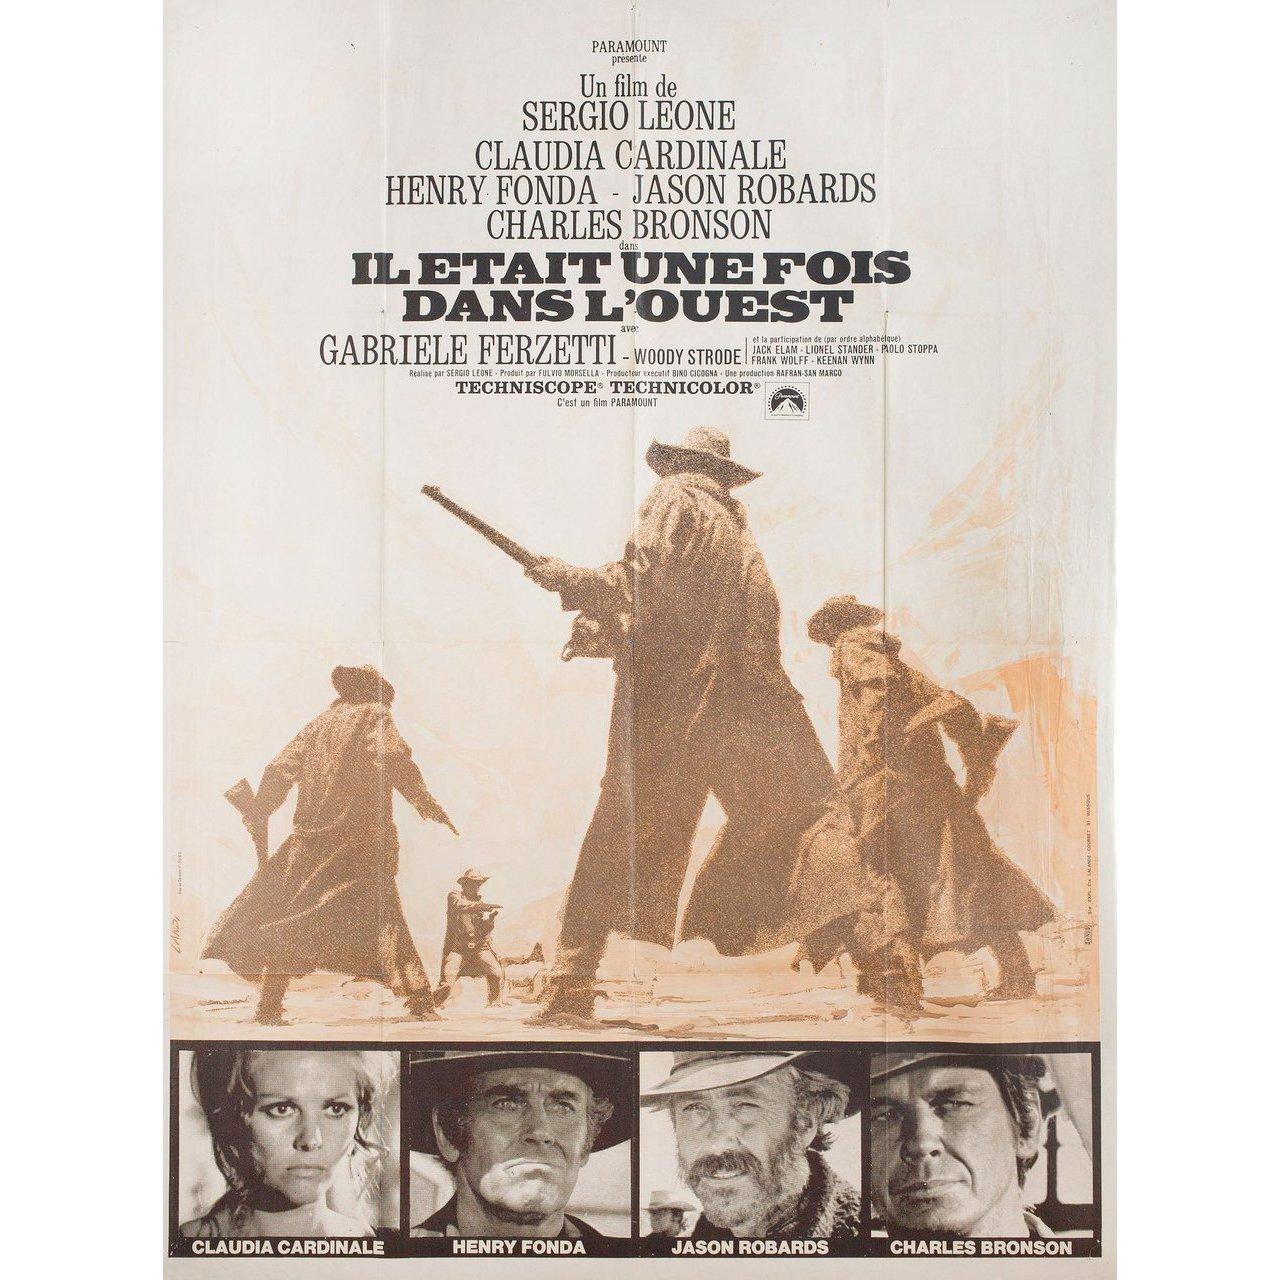 Original 1970s re-release French grande poster by Michel Landi for the film Once Upon a Time in the West (C'era una volta il West) directed by Sergio Leone with Claudia Cardinale / Henry Fonda / Jason Robards / Charles Bronson. Good-very good